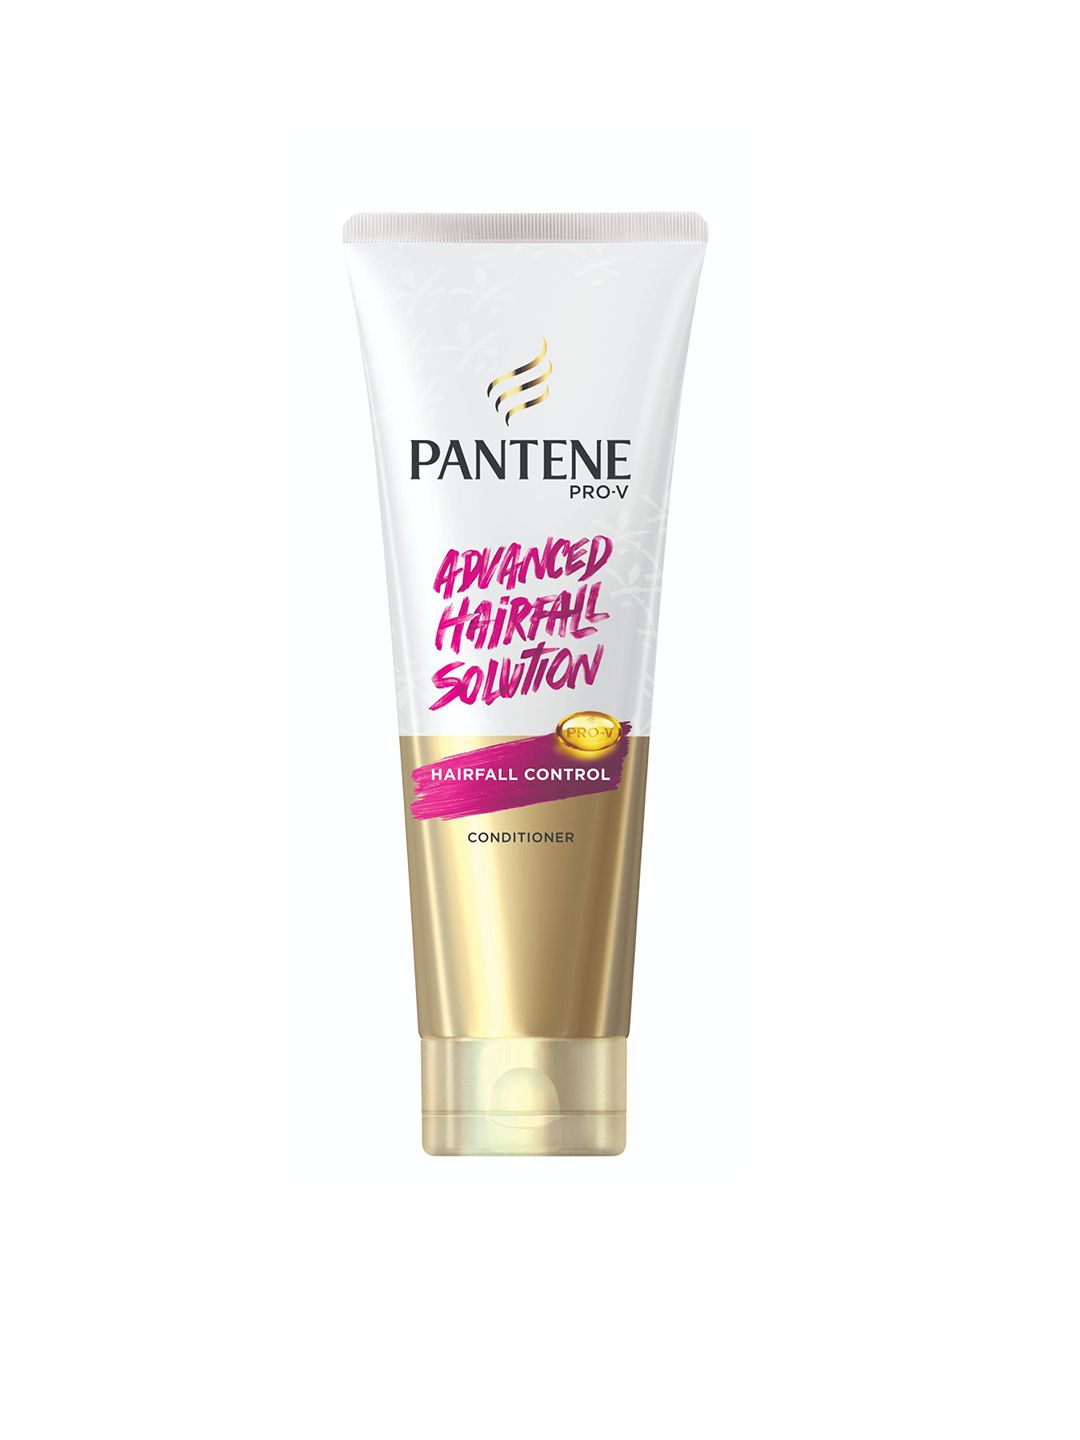 Pantene Advanced Hair Fall Solution Hair Fall Control Conditioner 180 ml Price in India